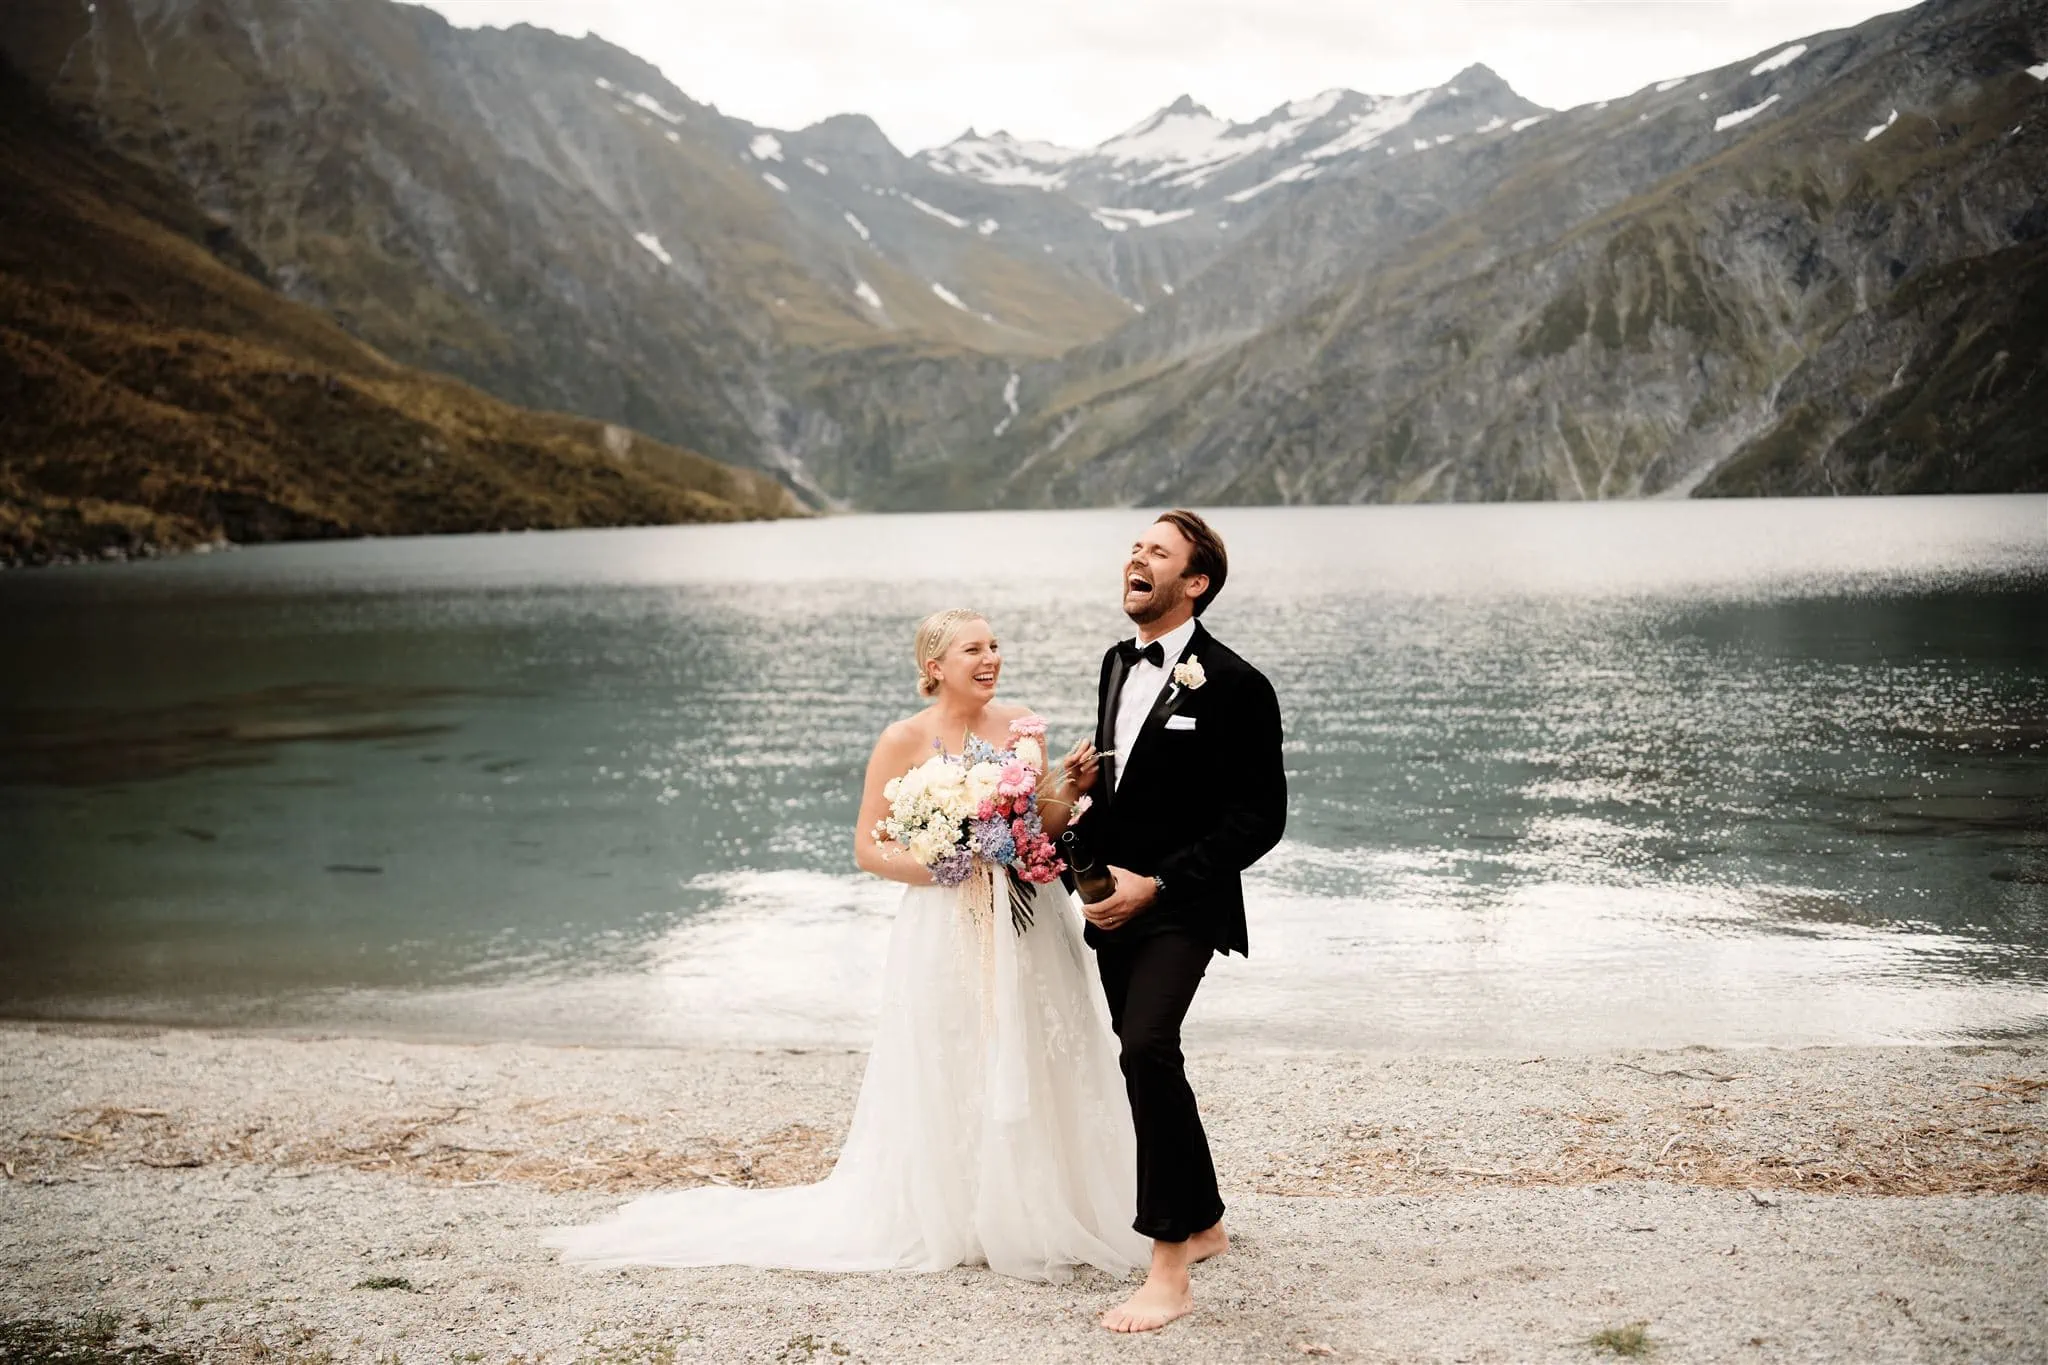  Queenstown Wedding Photographer takes stunning photos of a bride and groom in front of a lake in New Zealand.